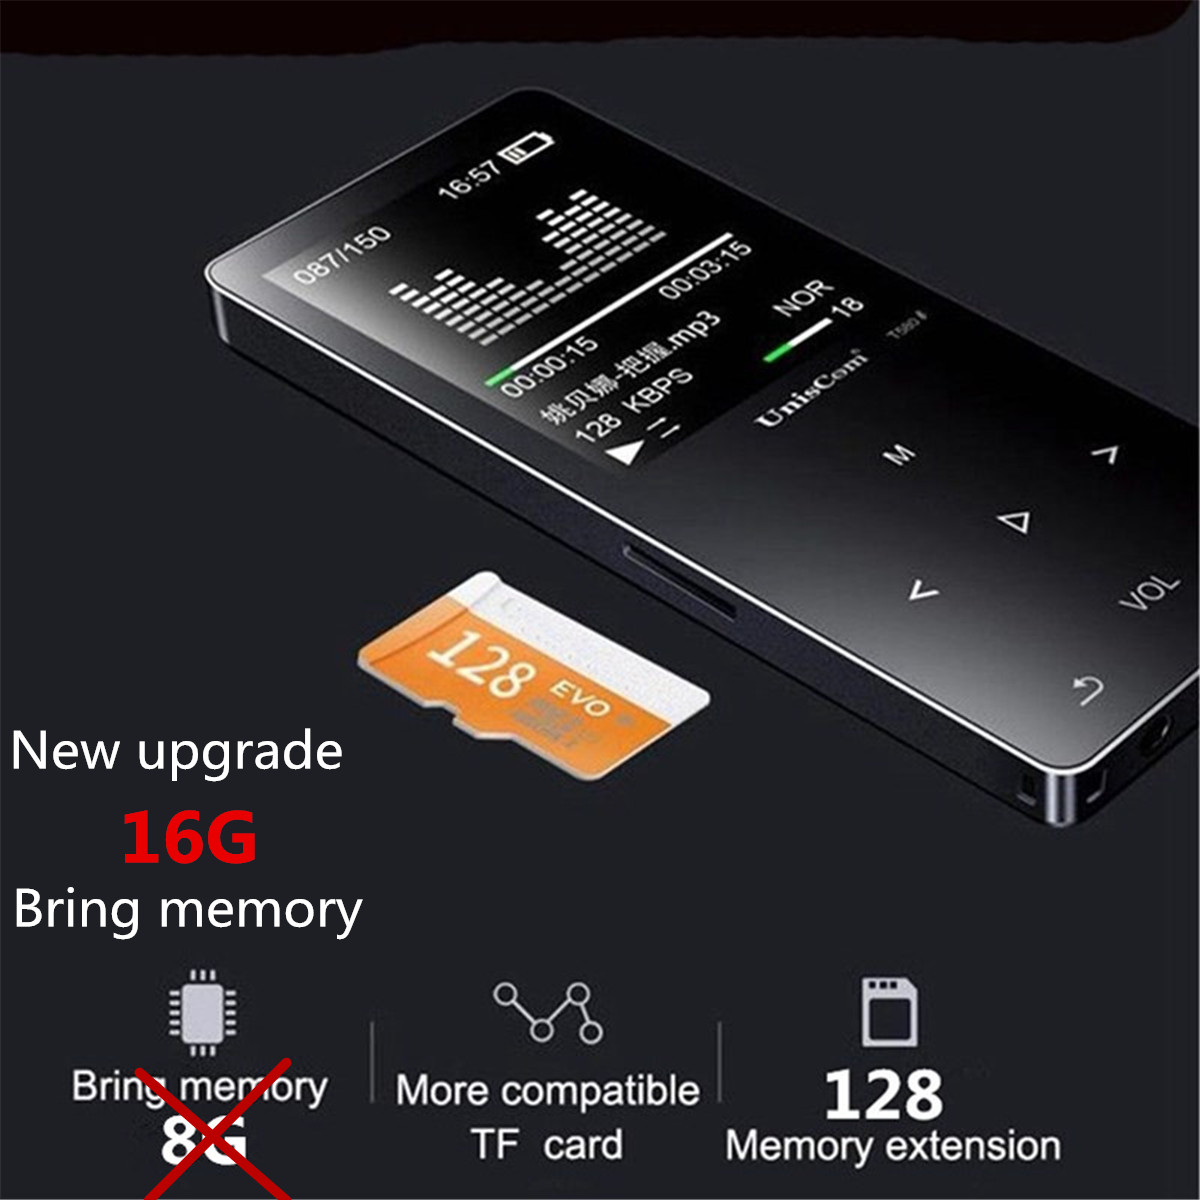 Uniscom 8G 1.8 Inch Screen bluetooth Lossless HIFI MP3 Music Player Support A-B Repeat Voice Record 9